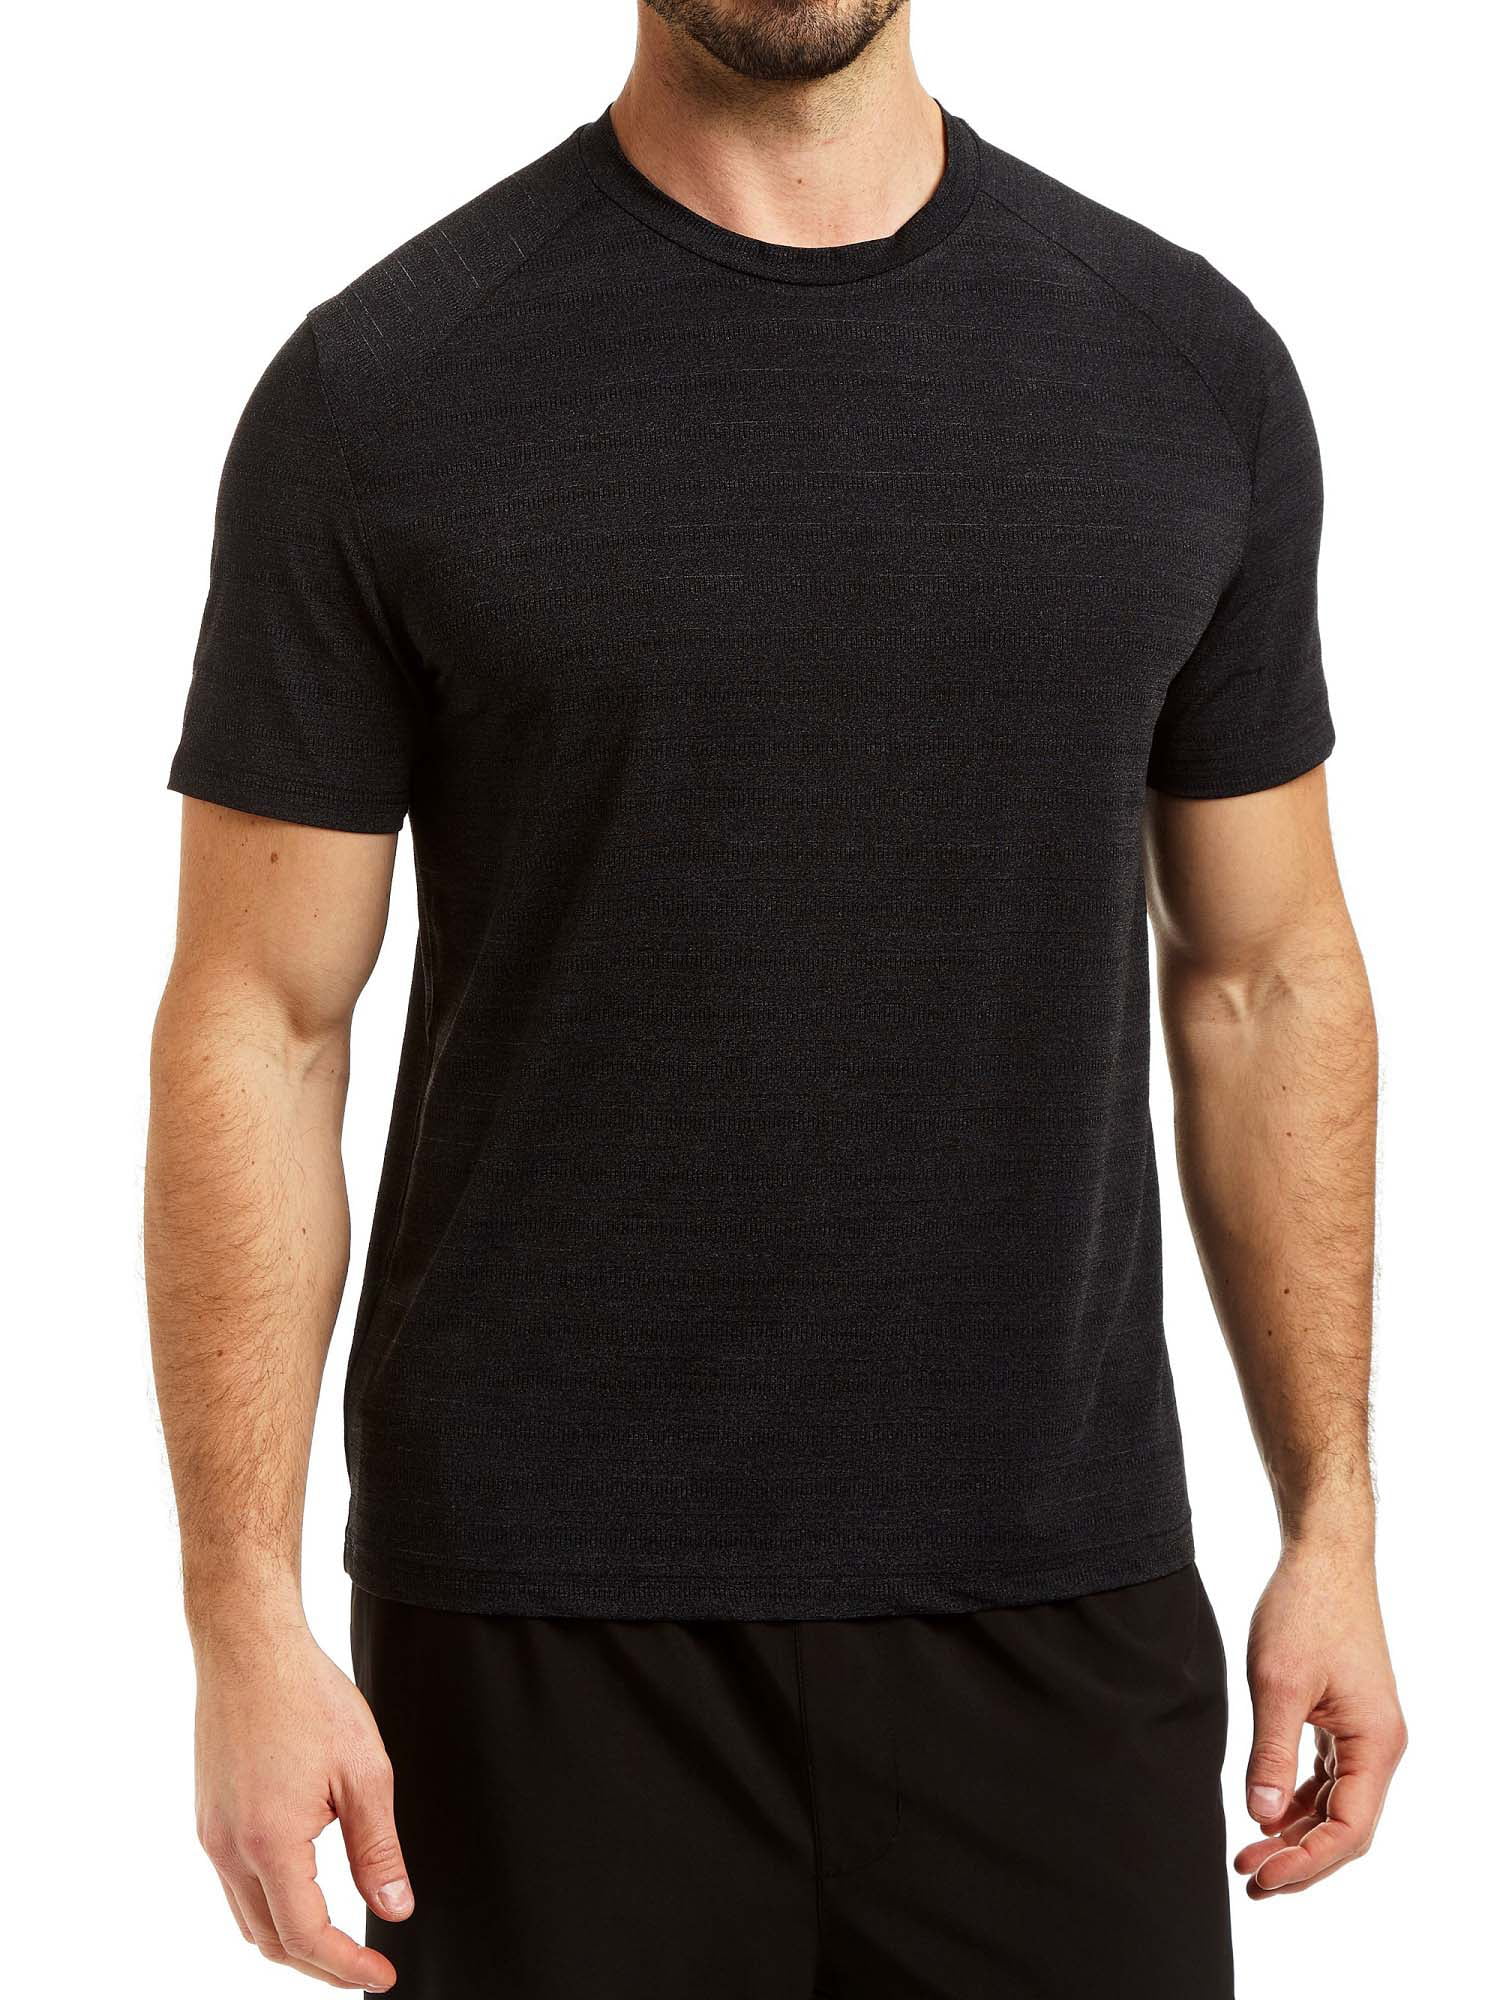 RFX by Rainforest Men's Short Sleeve Perforated Active Performance Tee ...